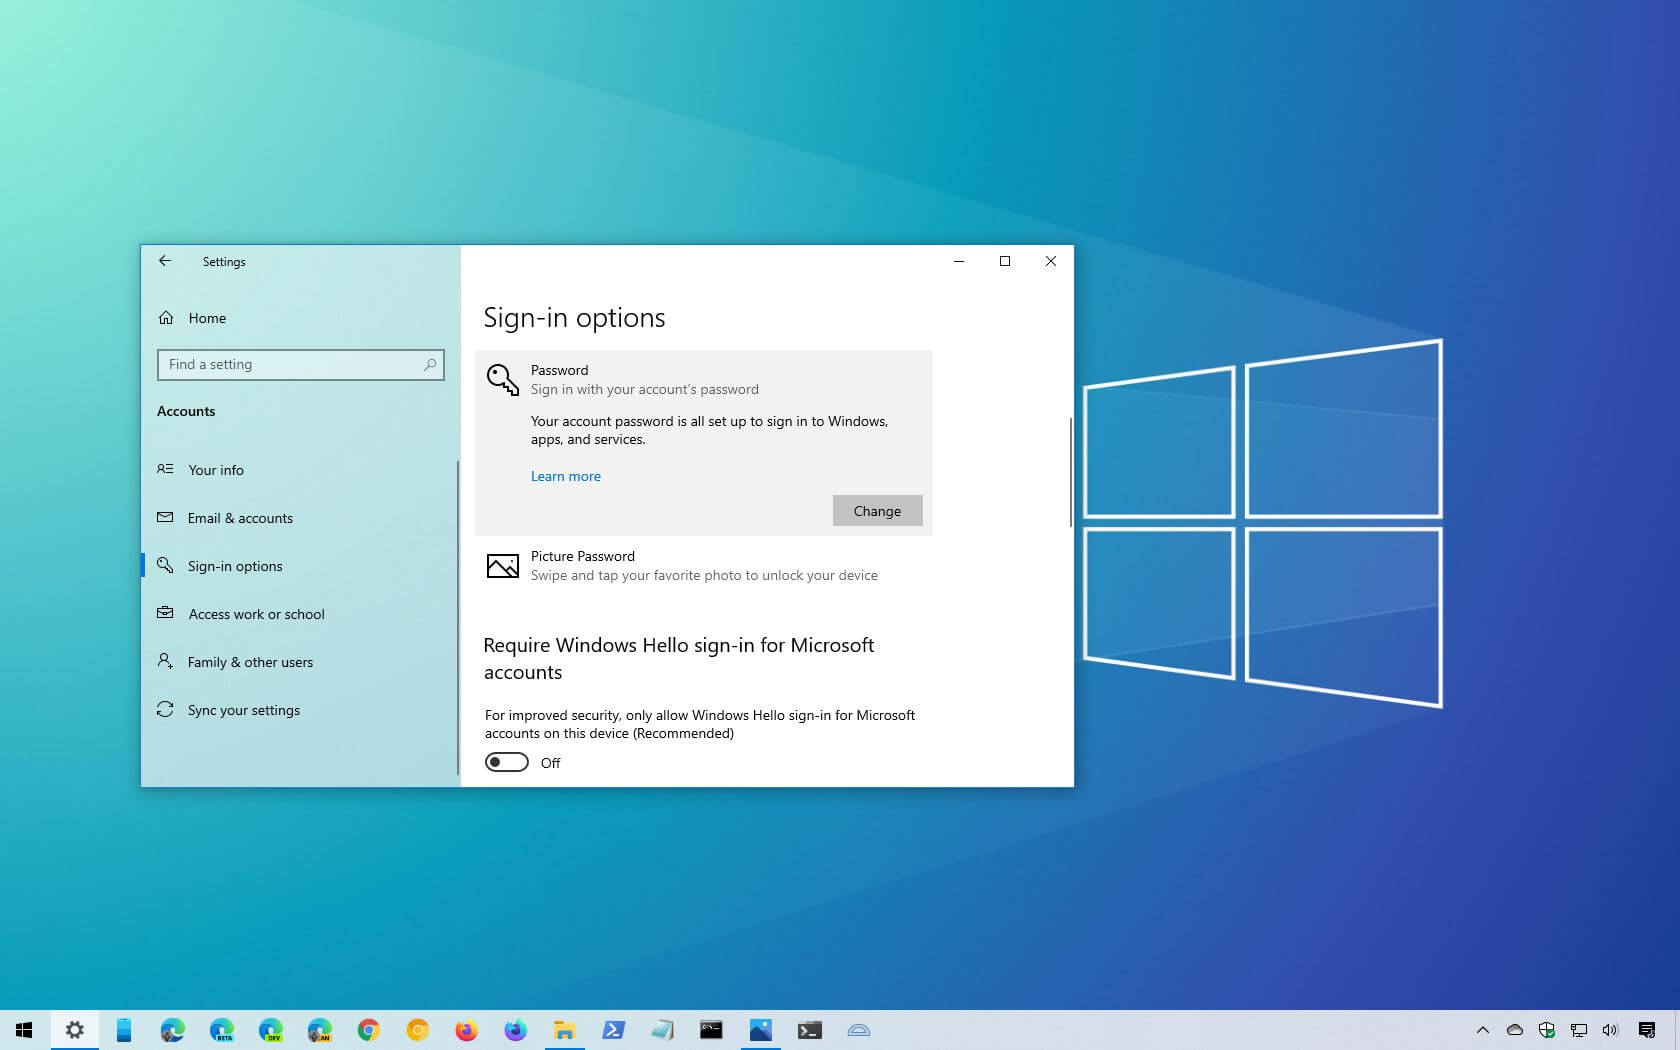 How to Remove/Change Your Password in Windows 10